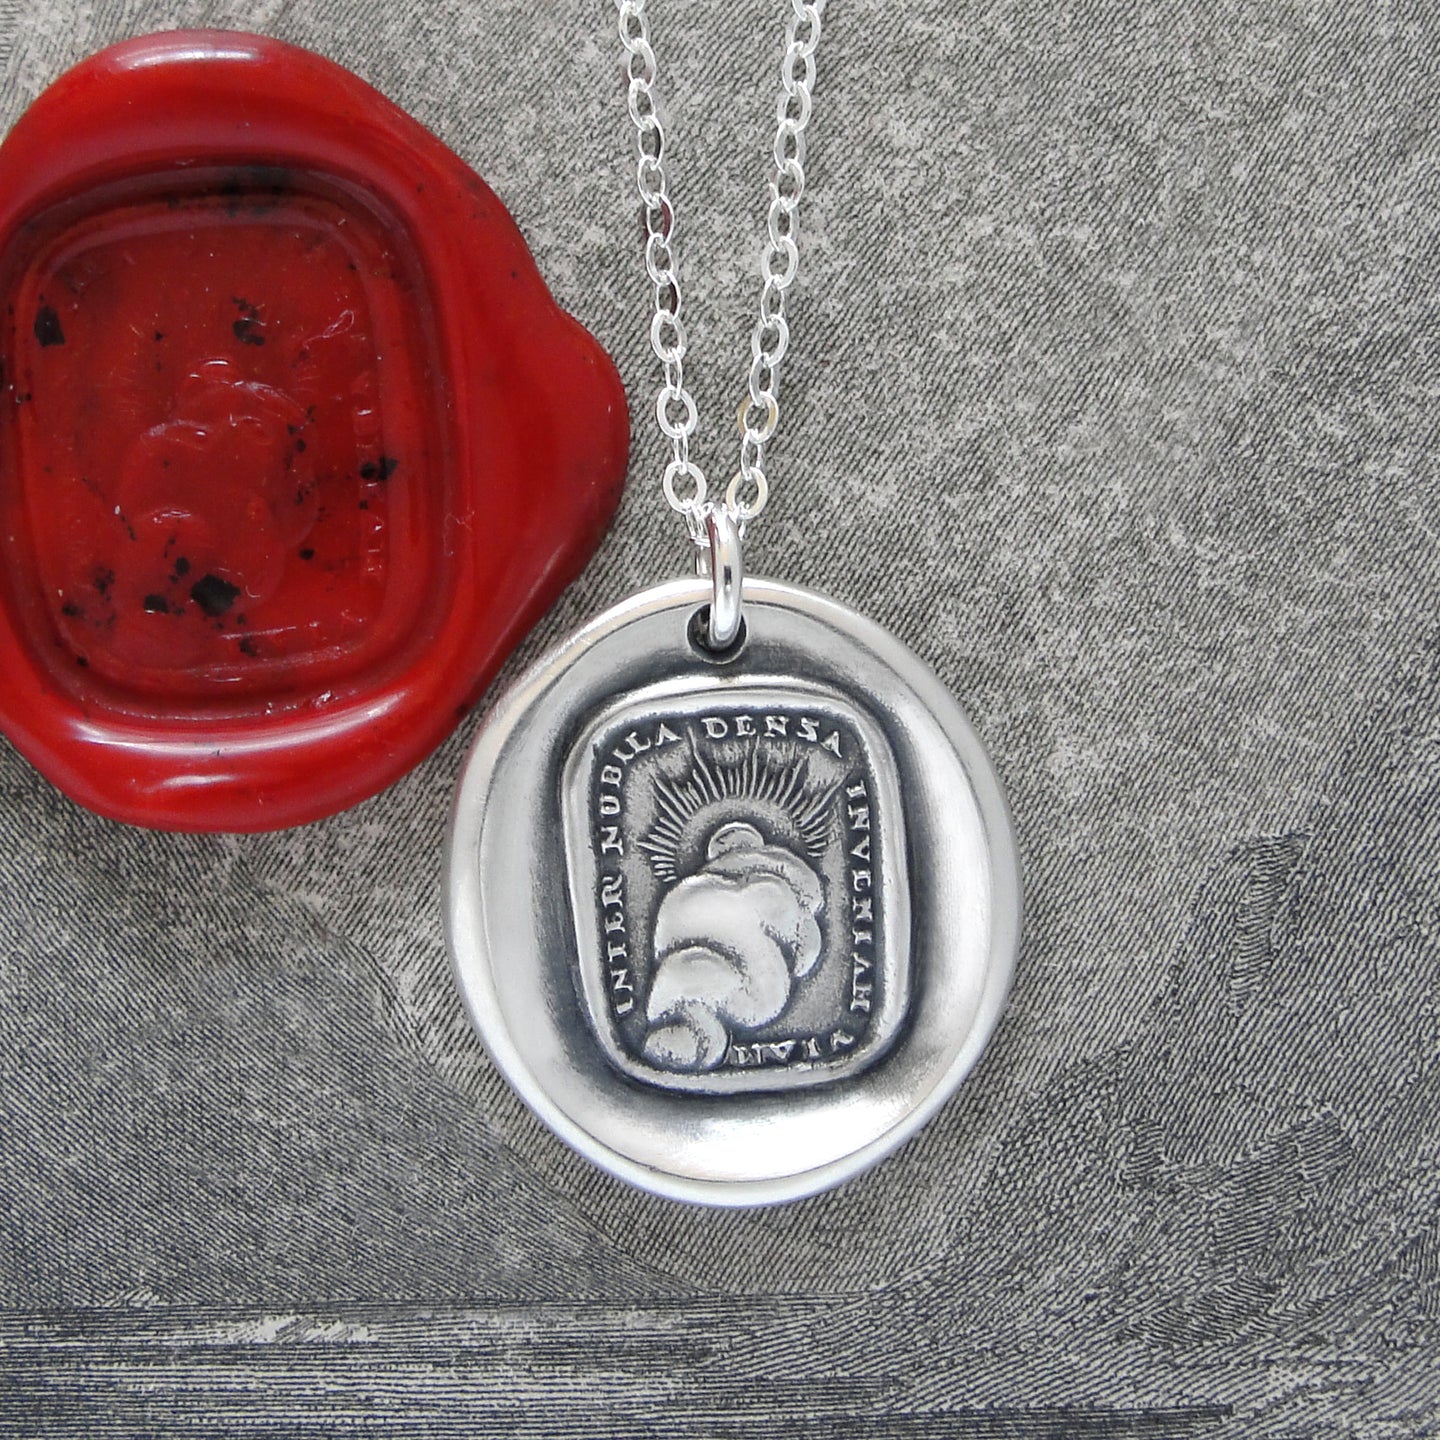 Silver Sun Wax Seal Necklace - Through Thickest Clouds I Find My Way motto